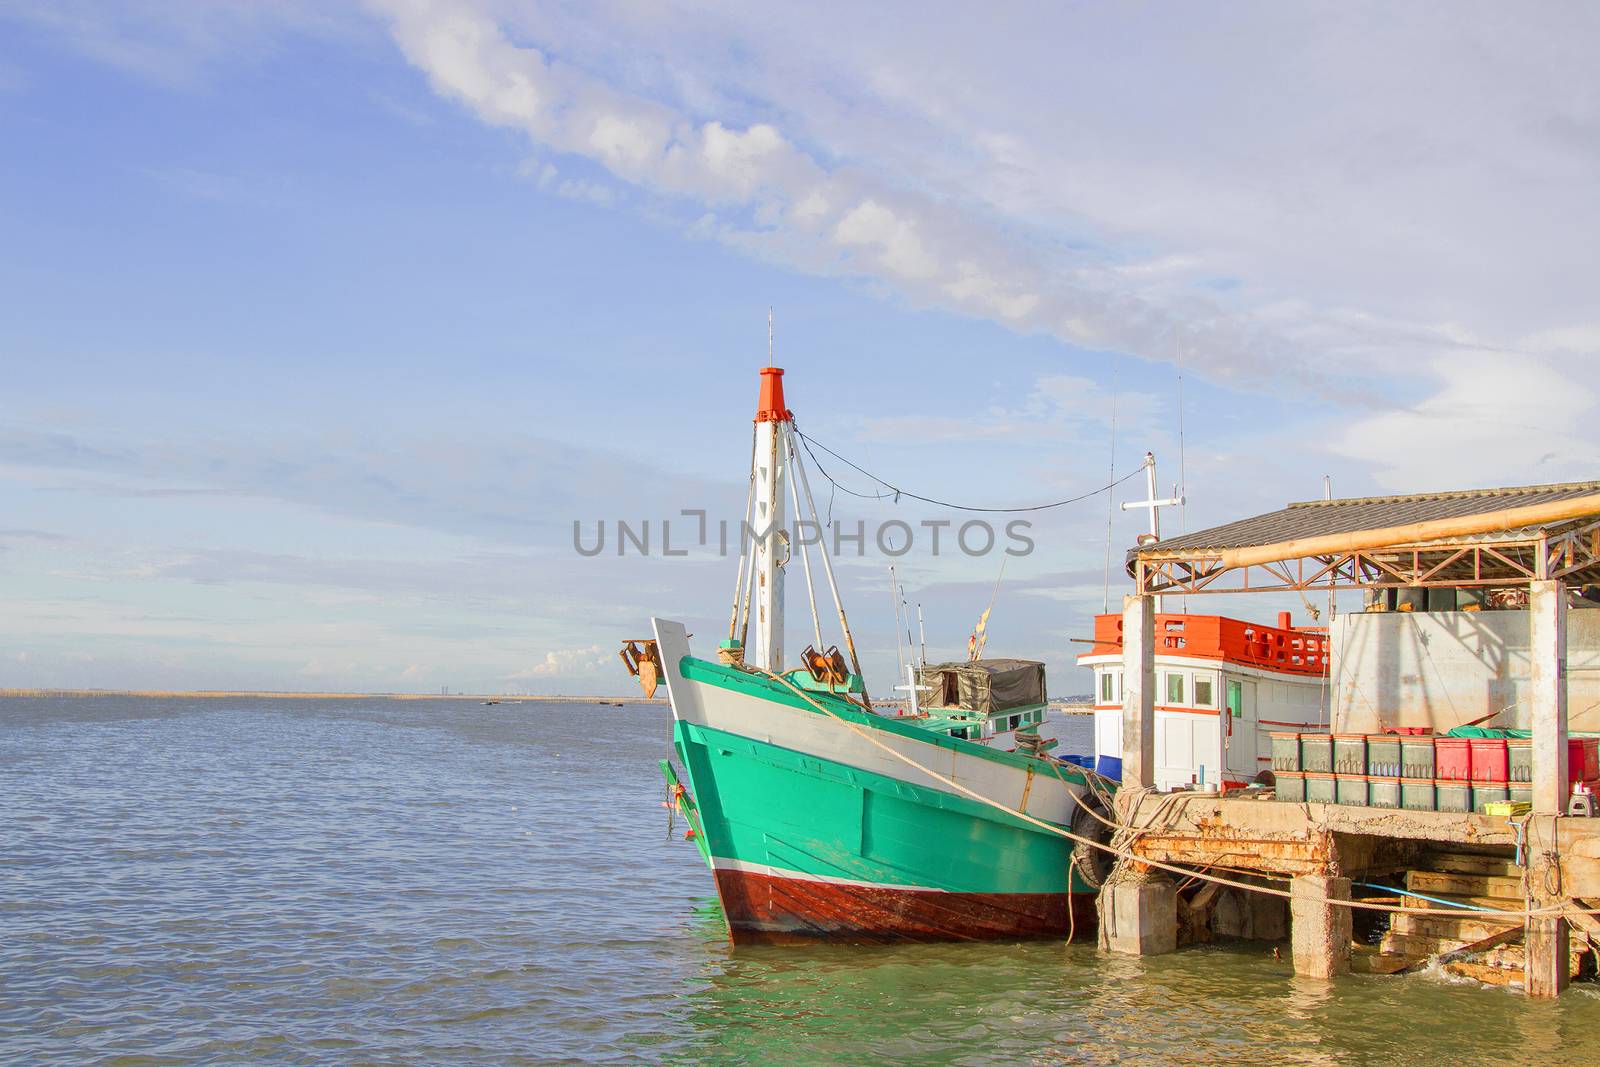 The green fishing boat is whitewashed against the pier with blue by TakerWalker